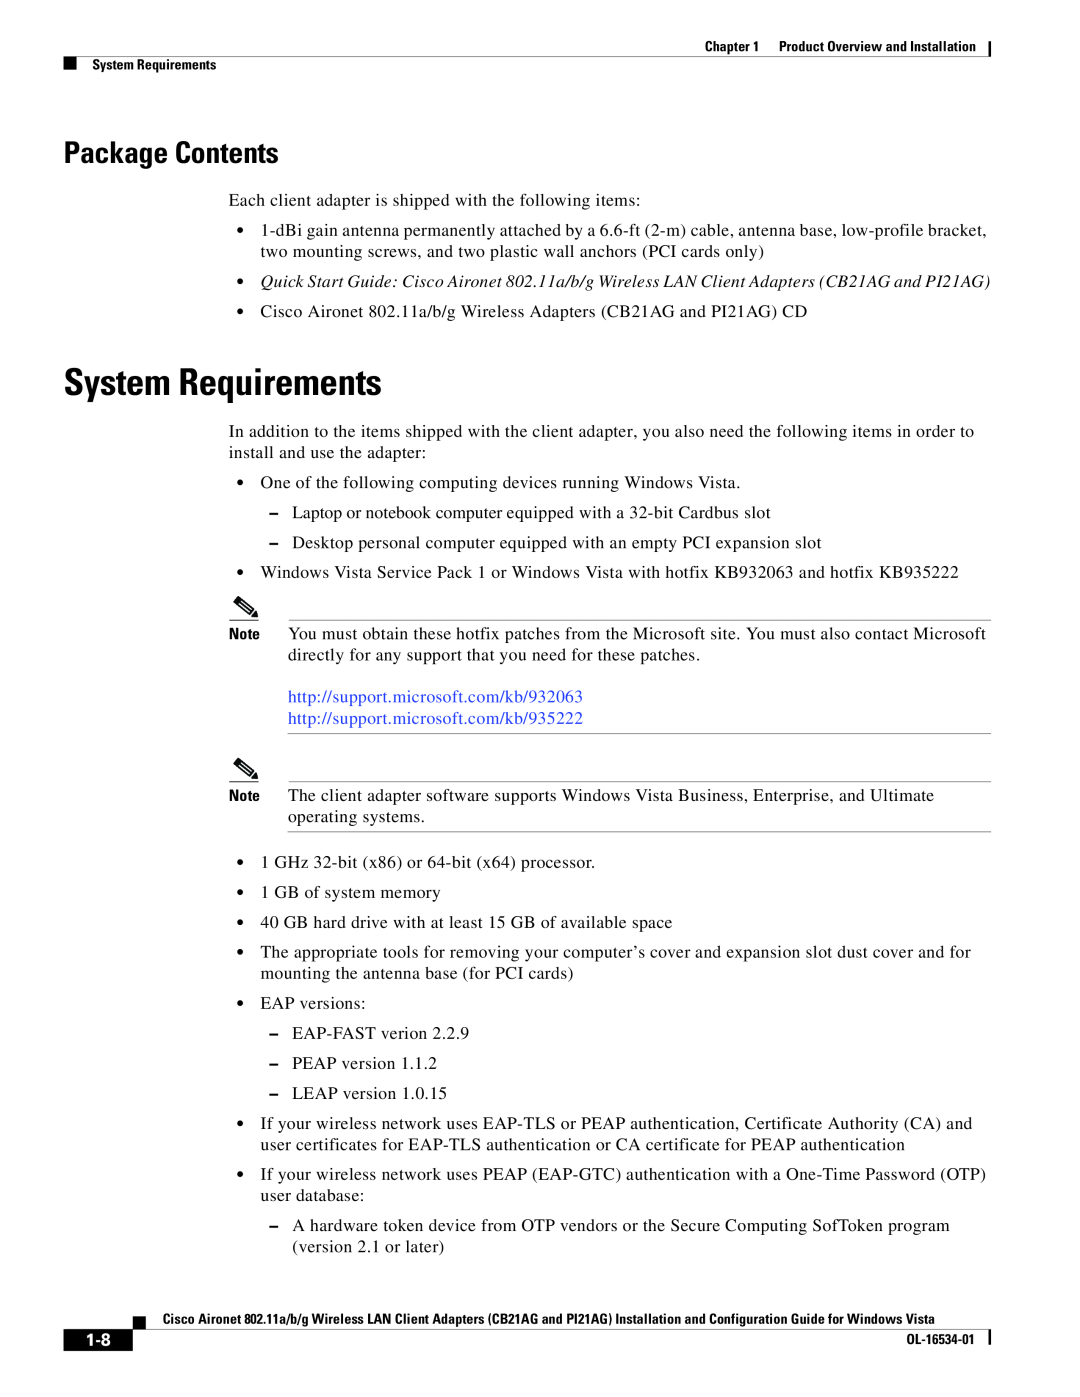 Cisco Systems PI21AG, CB21AG manual System Requirements, Package Contents 